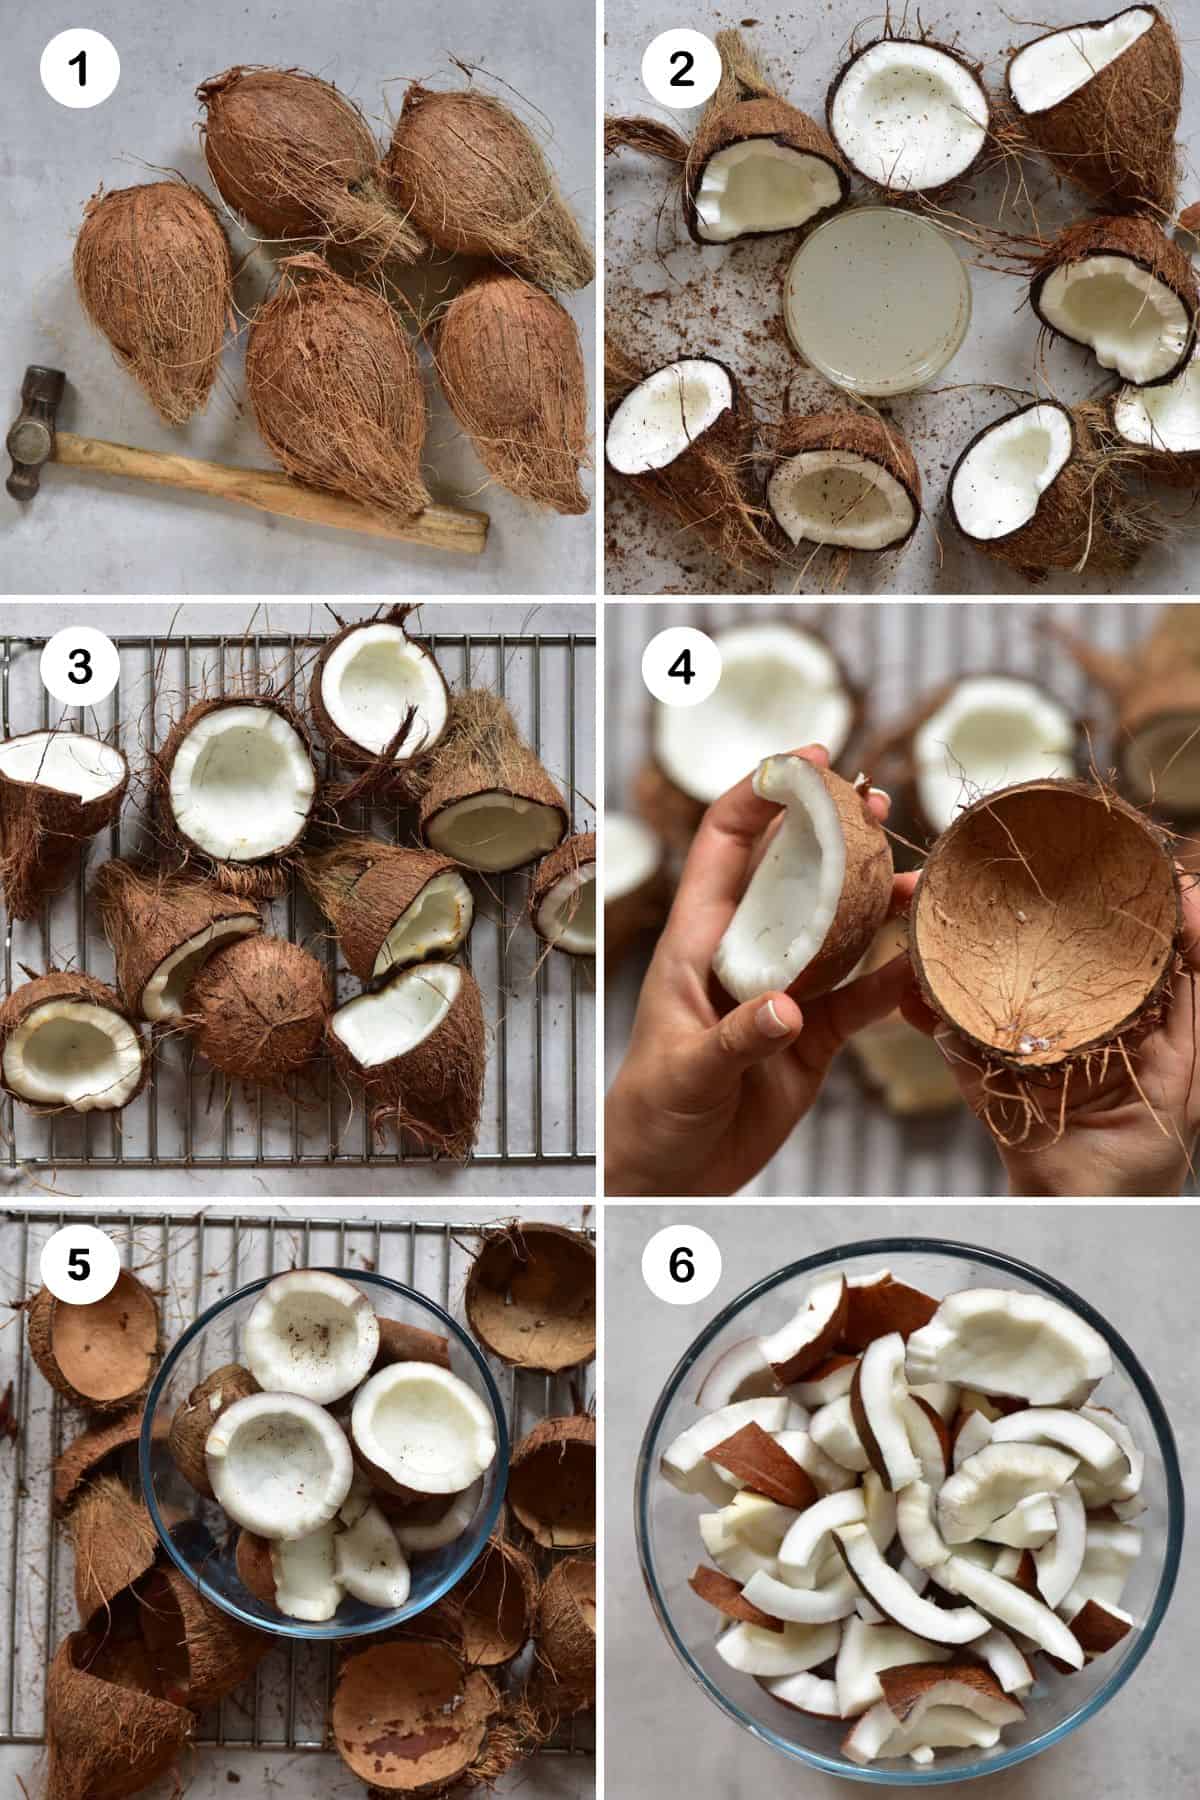 Steps for opening coconuts and removing the flesh from the shell